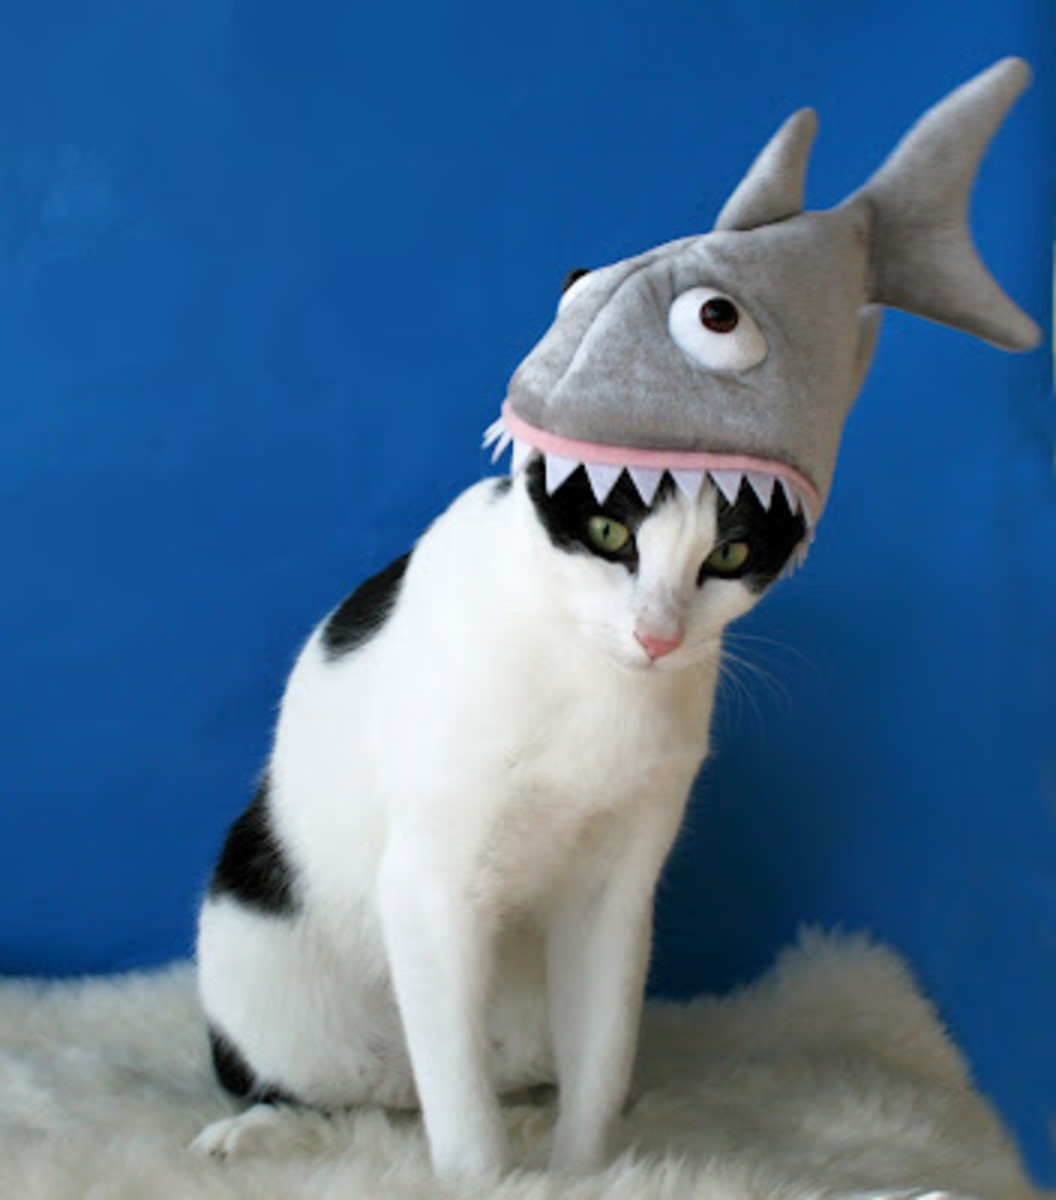 This cat in the (shark) hat.